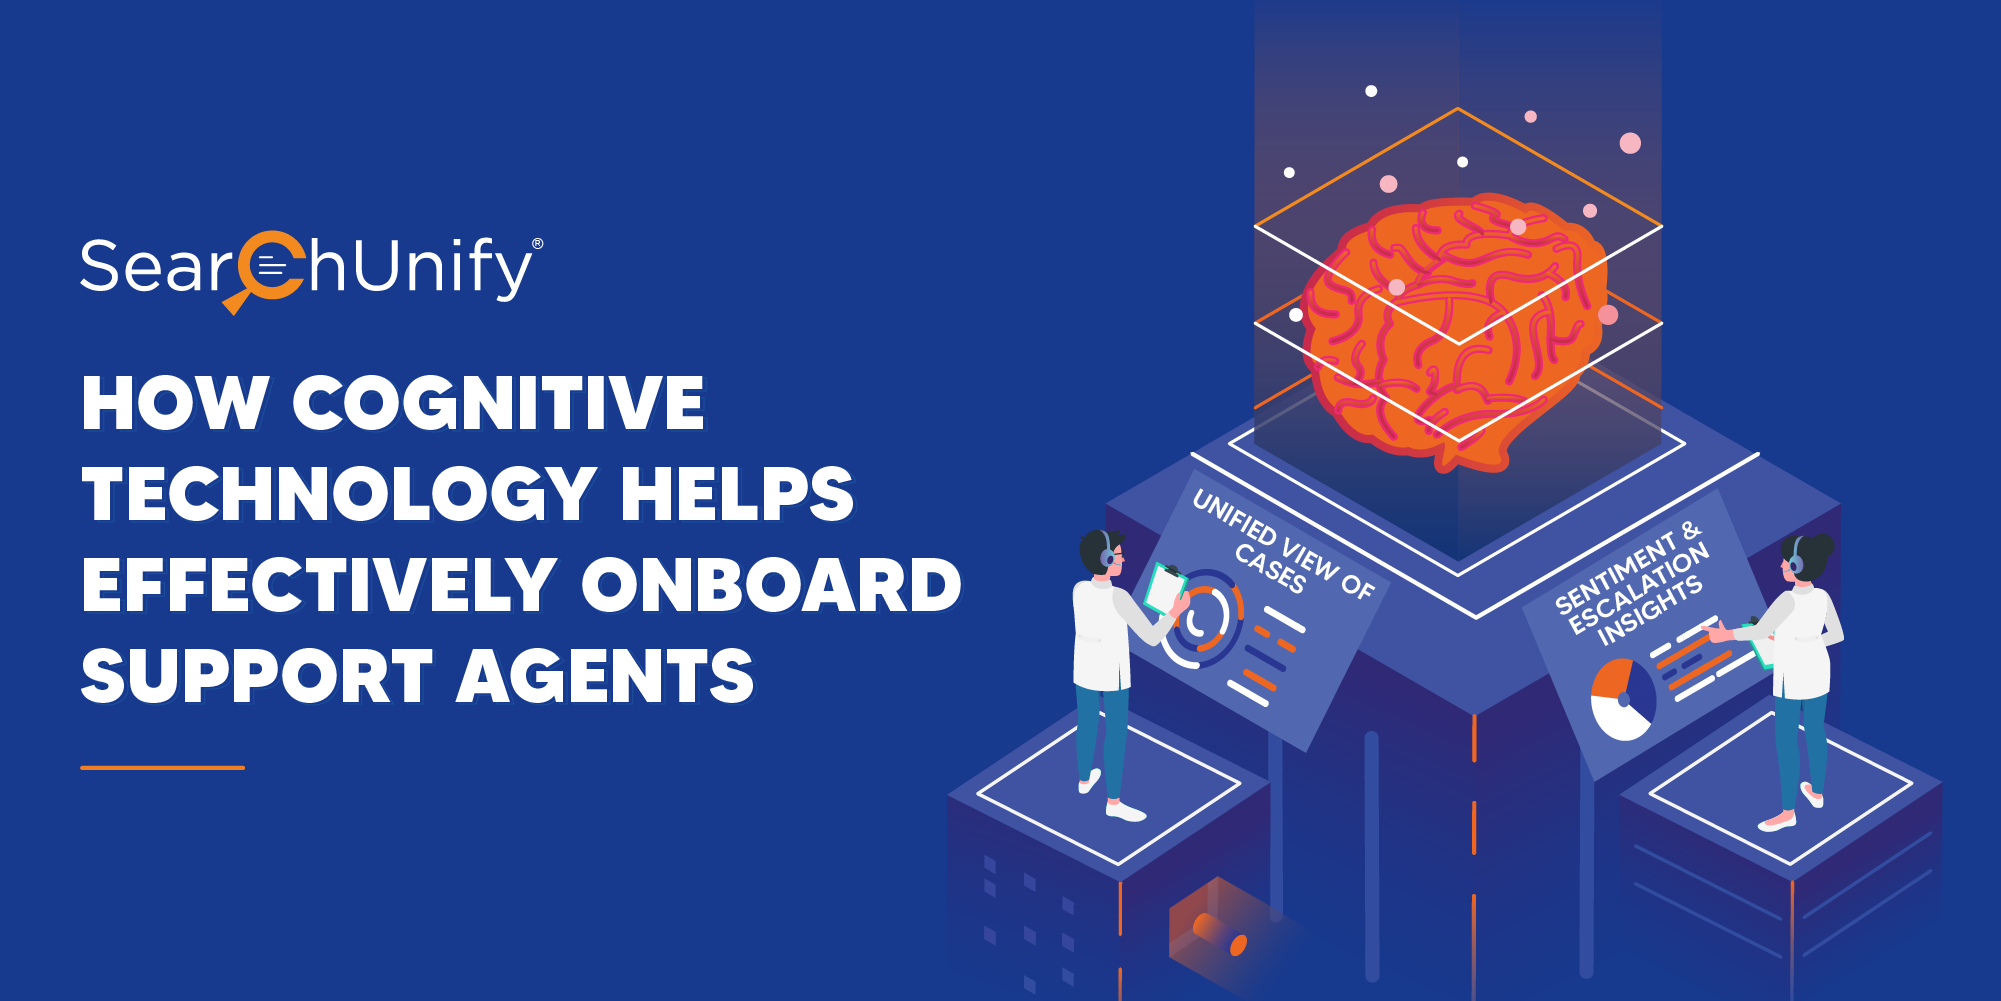 How Cognitive Technology Helps Effectively Onboard Support Agents